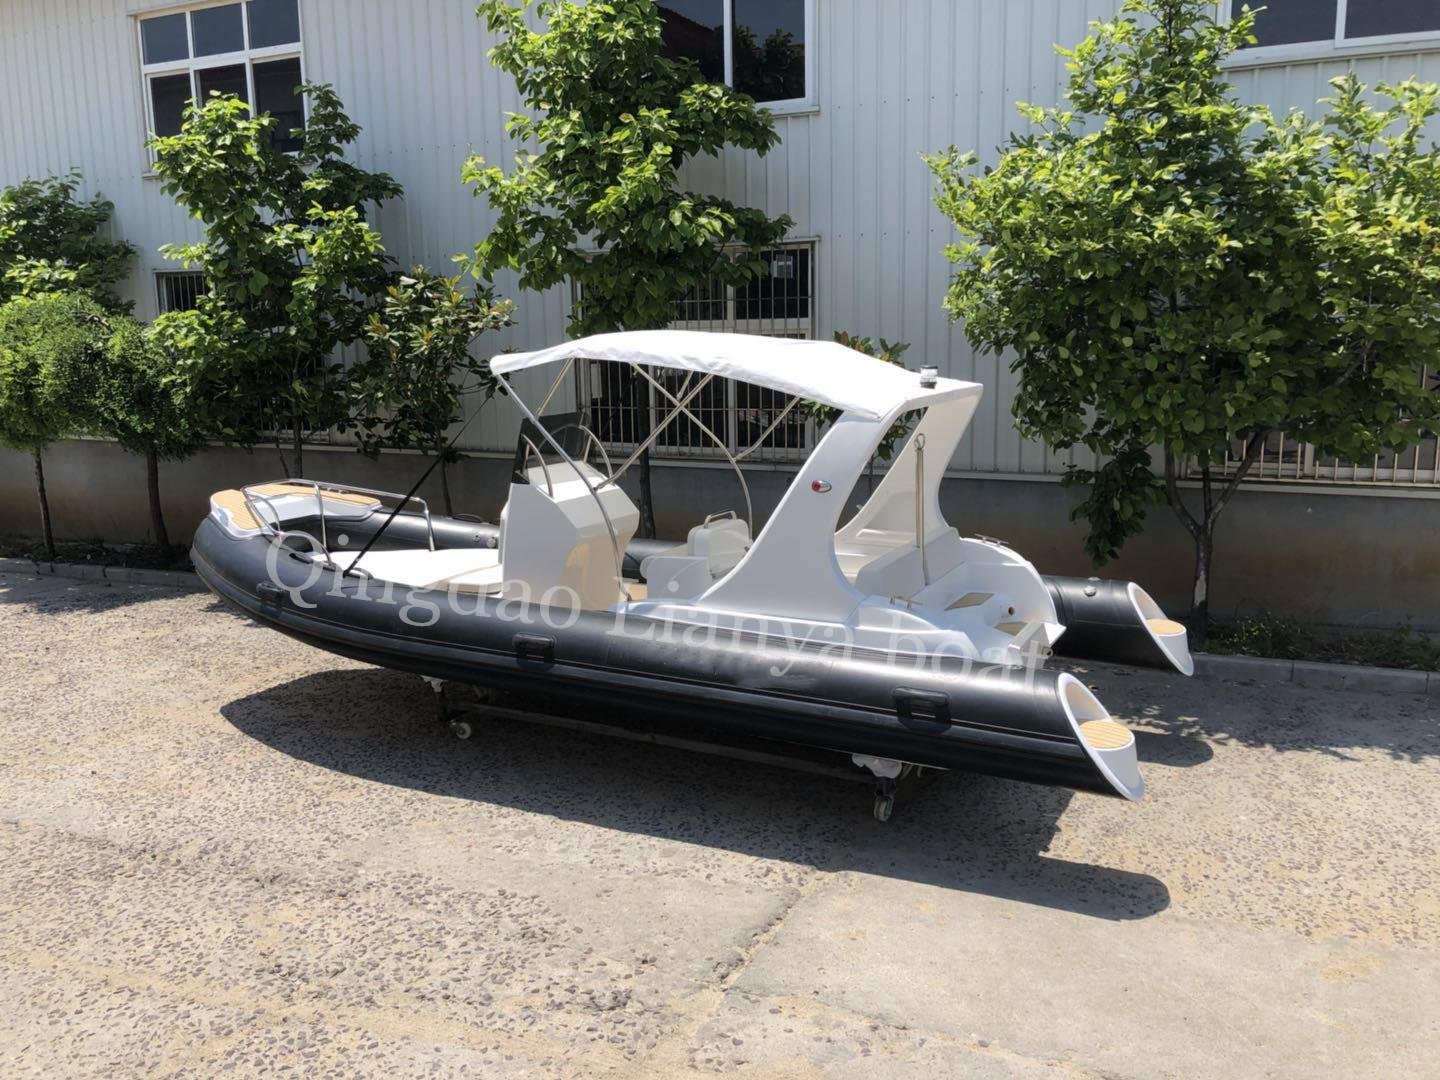 Liya 6.2m rigid inflatable boat for sale